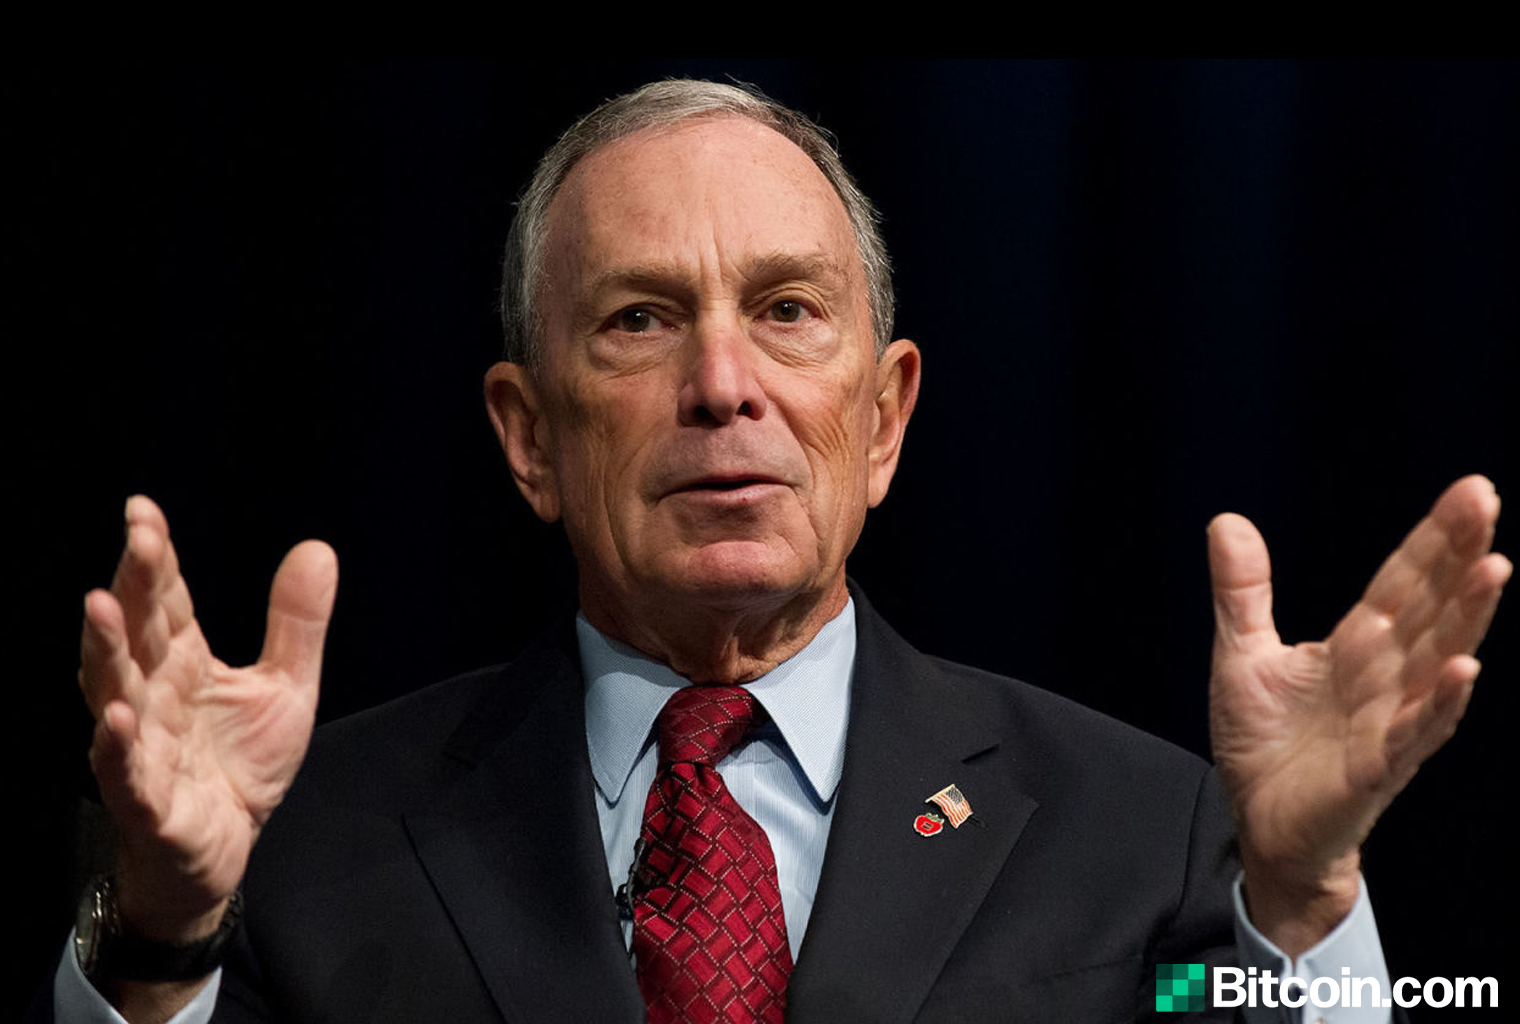 US Presidential Candidate Mike Bloomberg's Finance Policy Begs for Strict Bitcoin Regulations